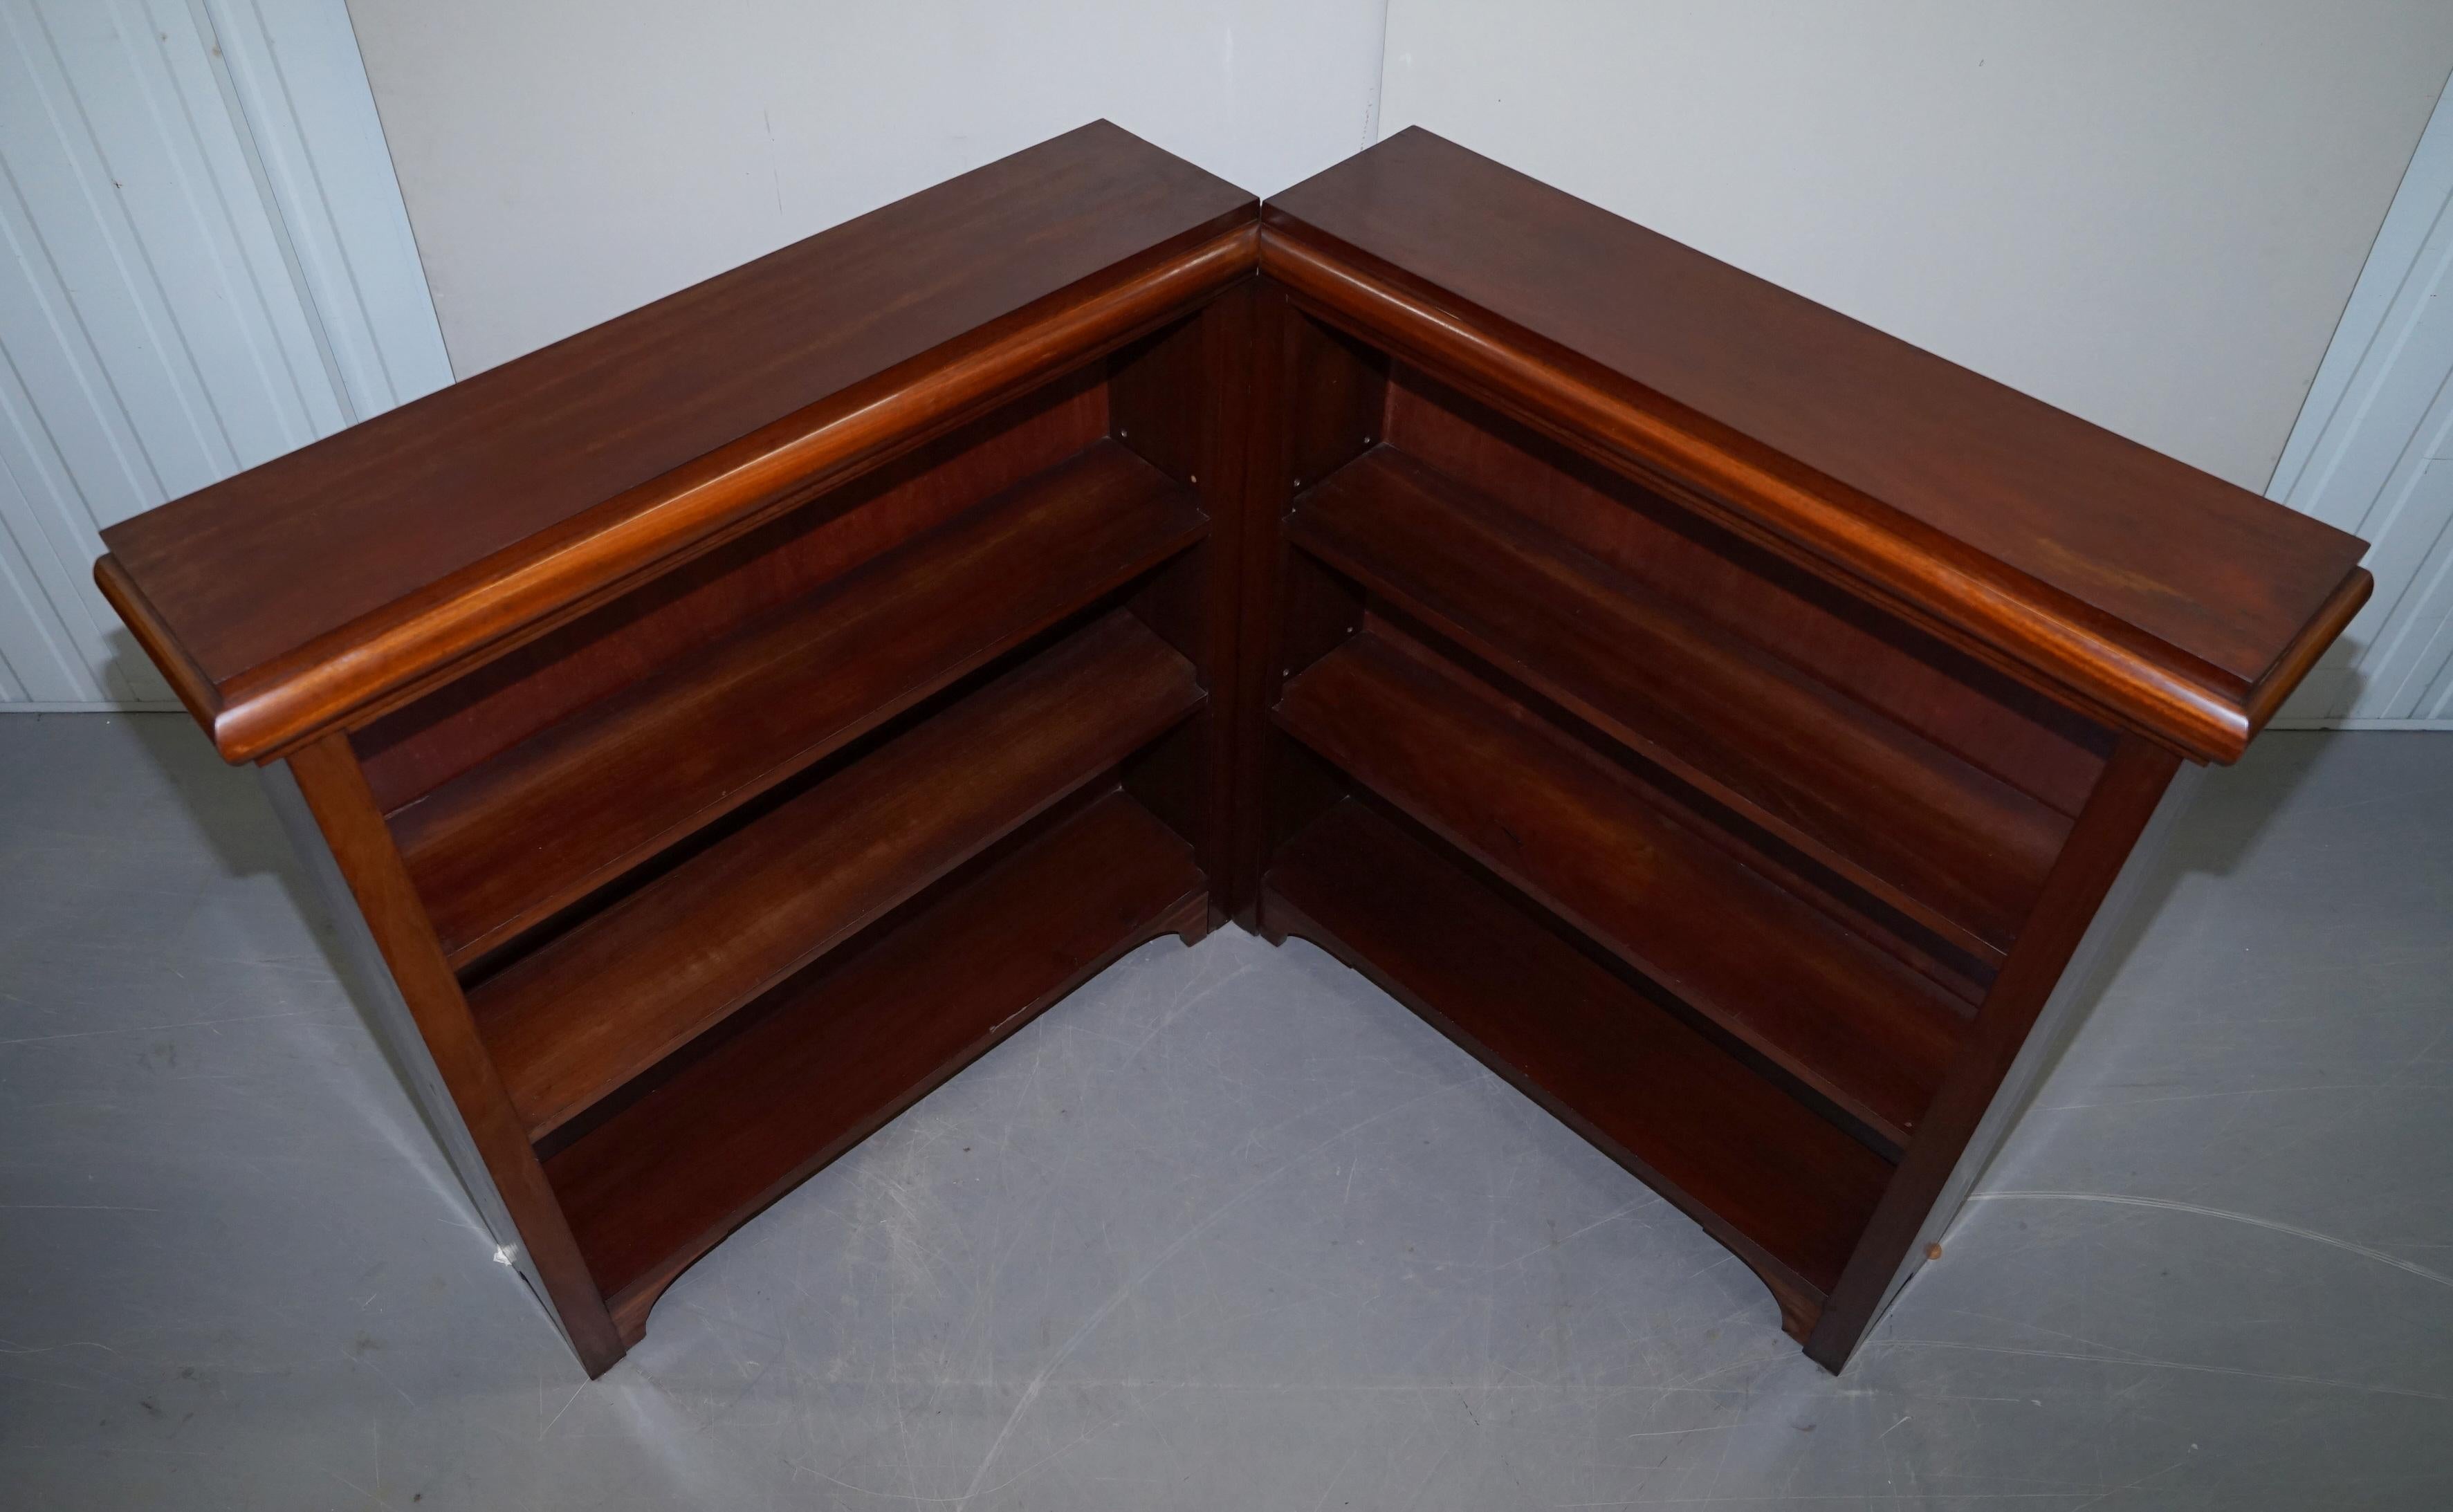 We are delighted to offer for sale this lovely pair of Victorian hardwood dwarf open bookcases which made a corner bookcases

A very good looking, well made and decorative pair of dwarf bookcases, these are a pair, designed to be used as corner